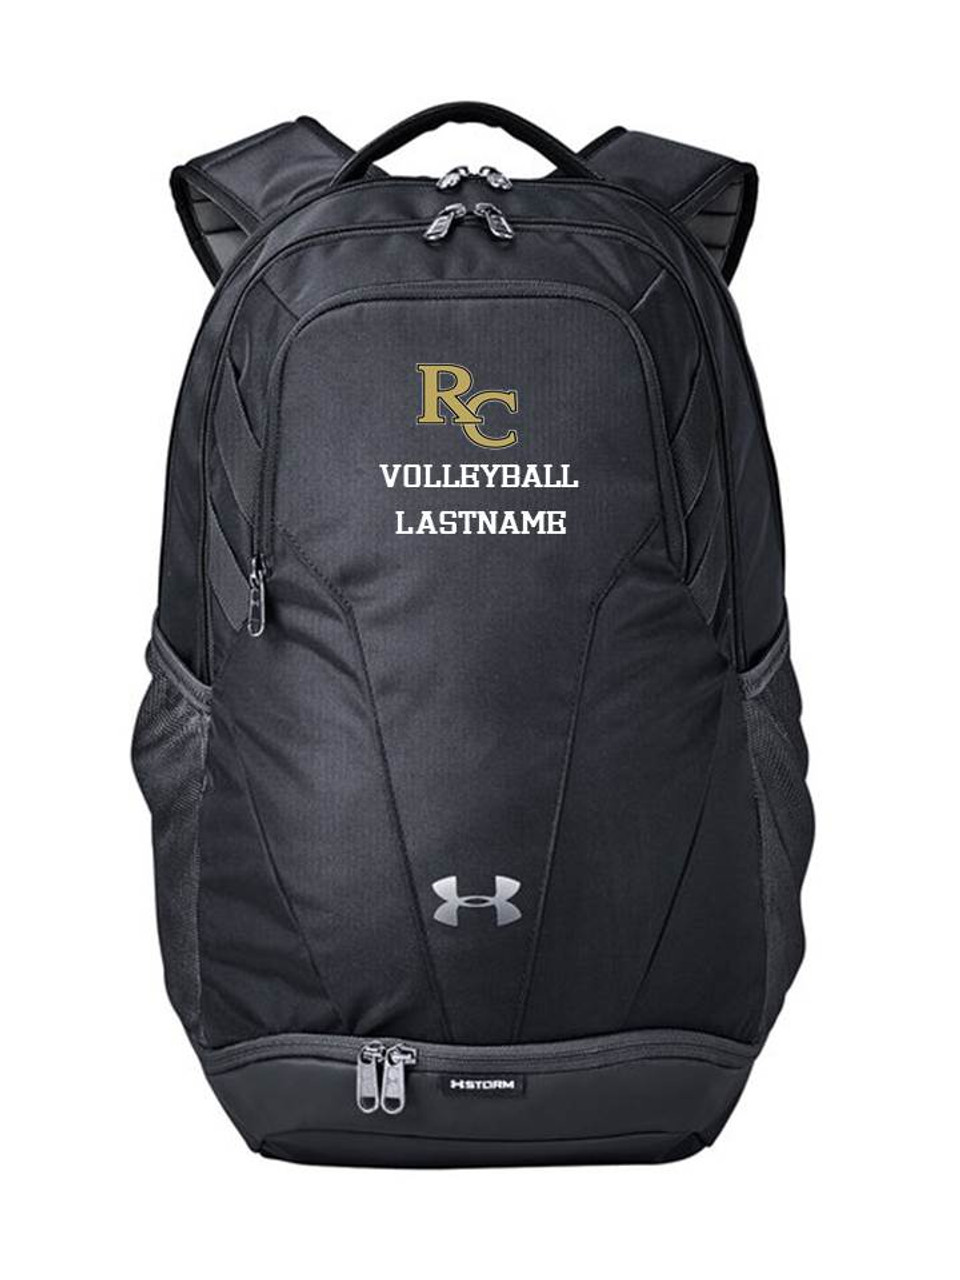 Boys Under Armour Volleyball Backpack - Educational Outfitters - Denver